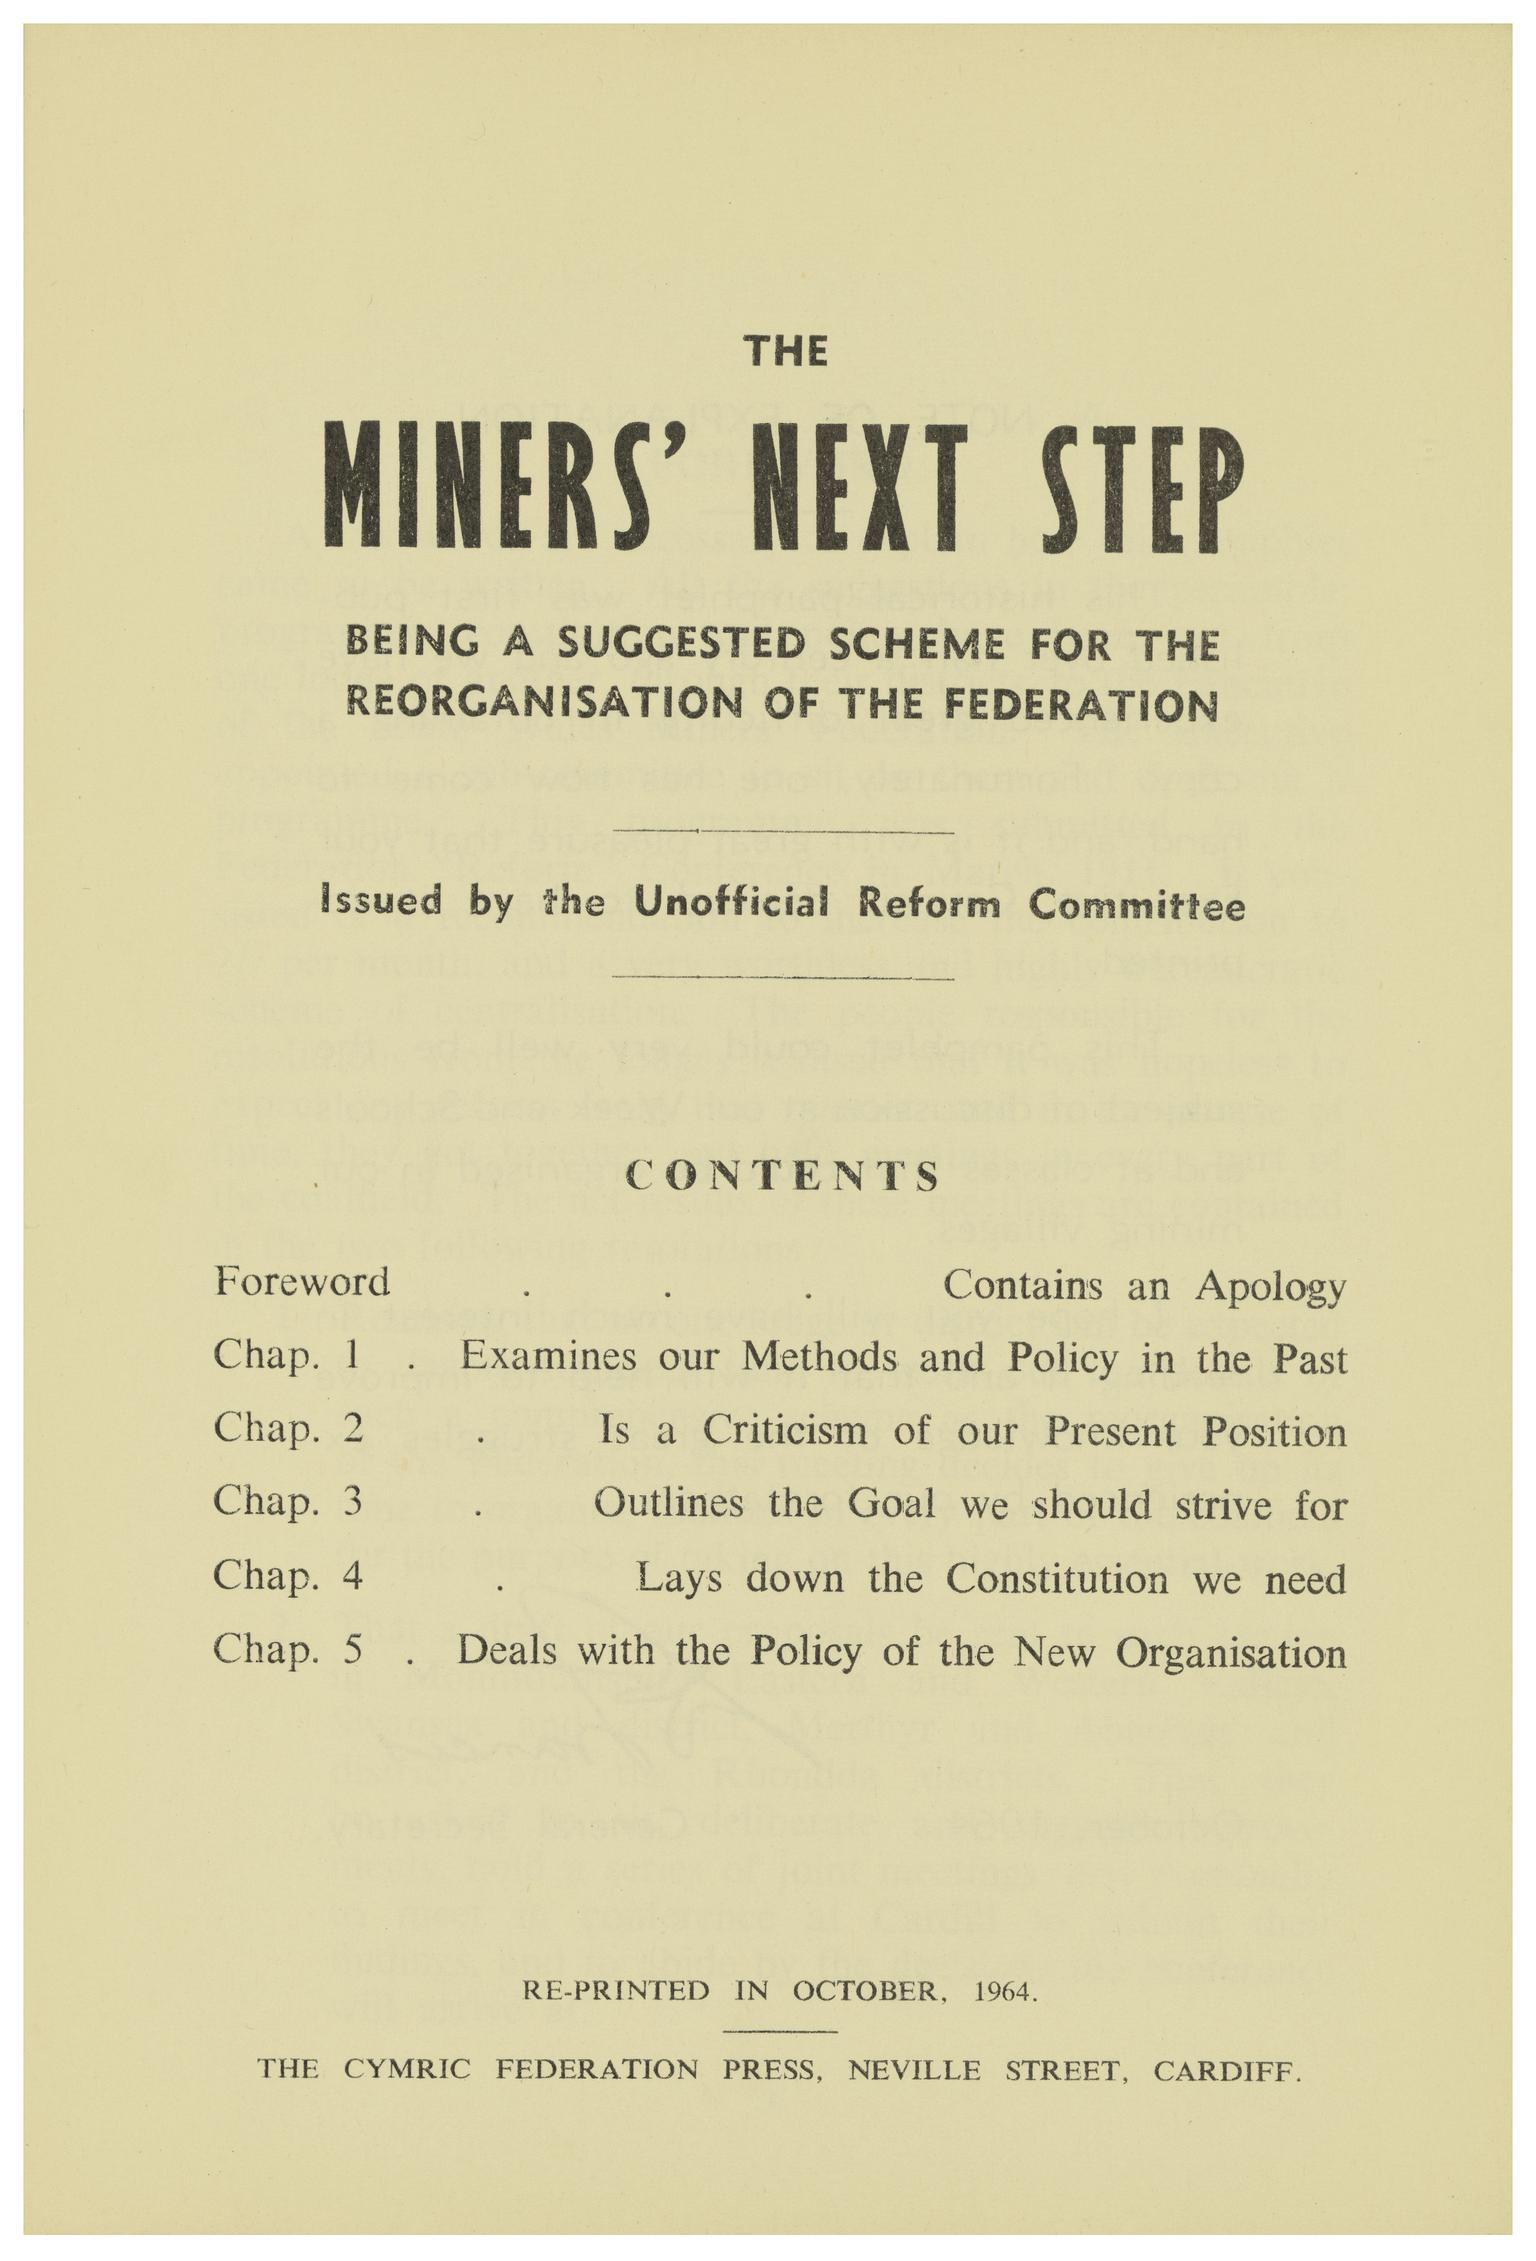 The Miners' Next Step (booklet)